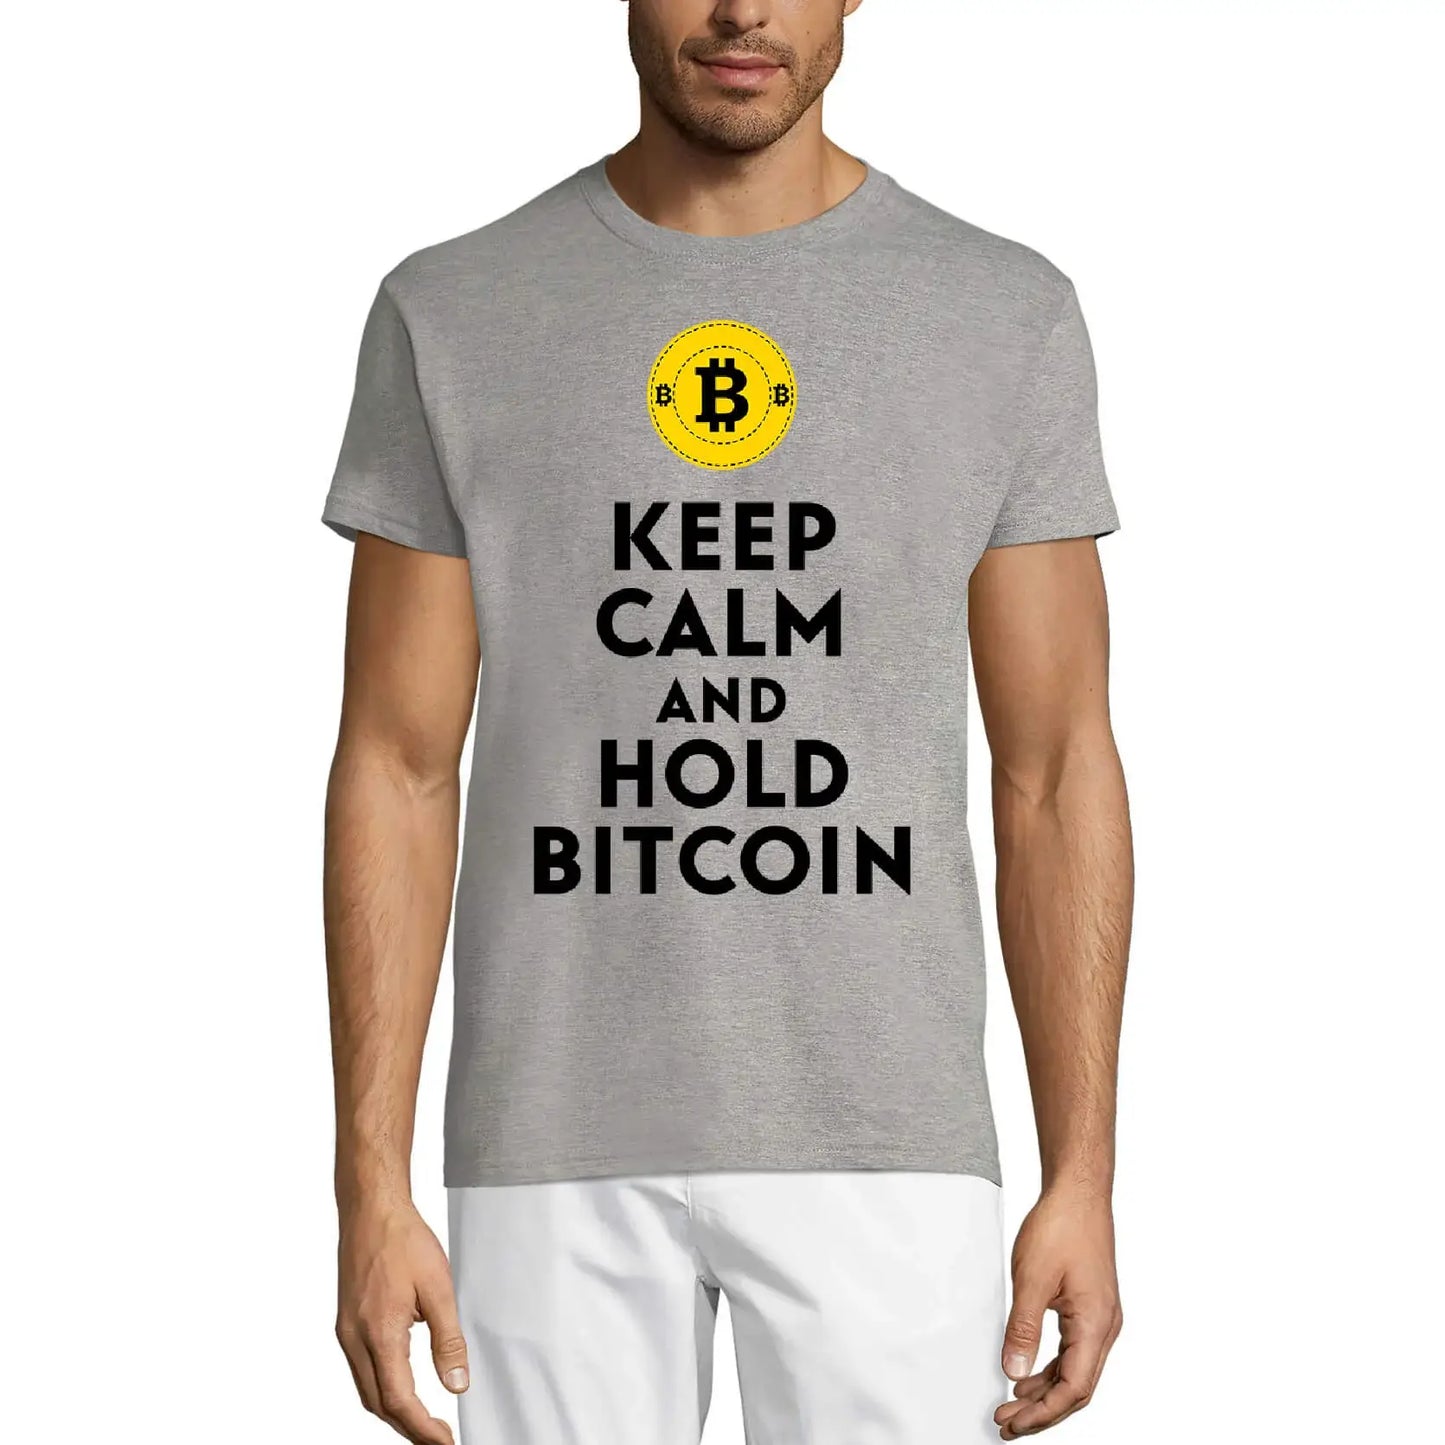 Men's Graphic T-Shirt Keep Calm And Hold Bitcoin Traders Quote - Crypto Mining Eco-Friendly Limited Edition Short Sleeve Tee-Shirt Vintage Birthday Gift Novelty